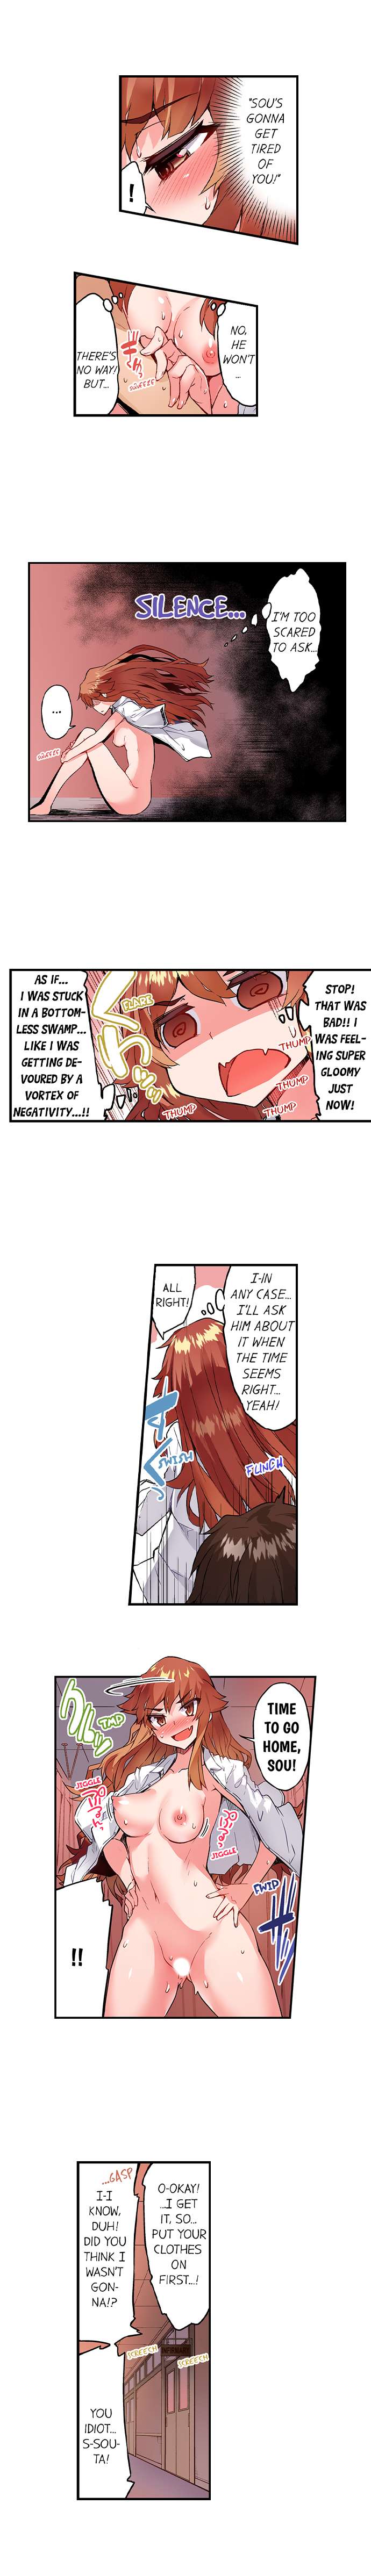 Traditional Job of Washing Girls’ Body - Chapter 142 Page 9